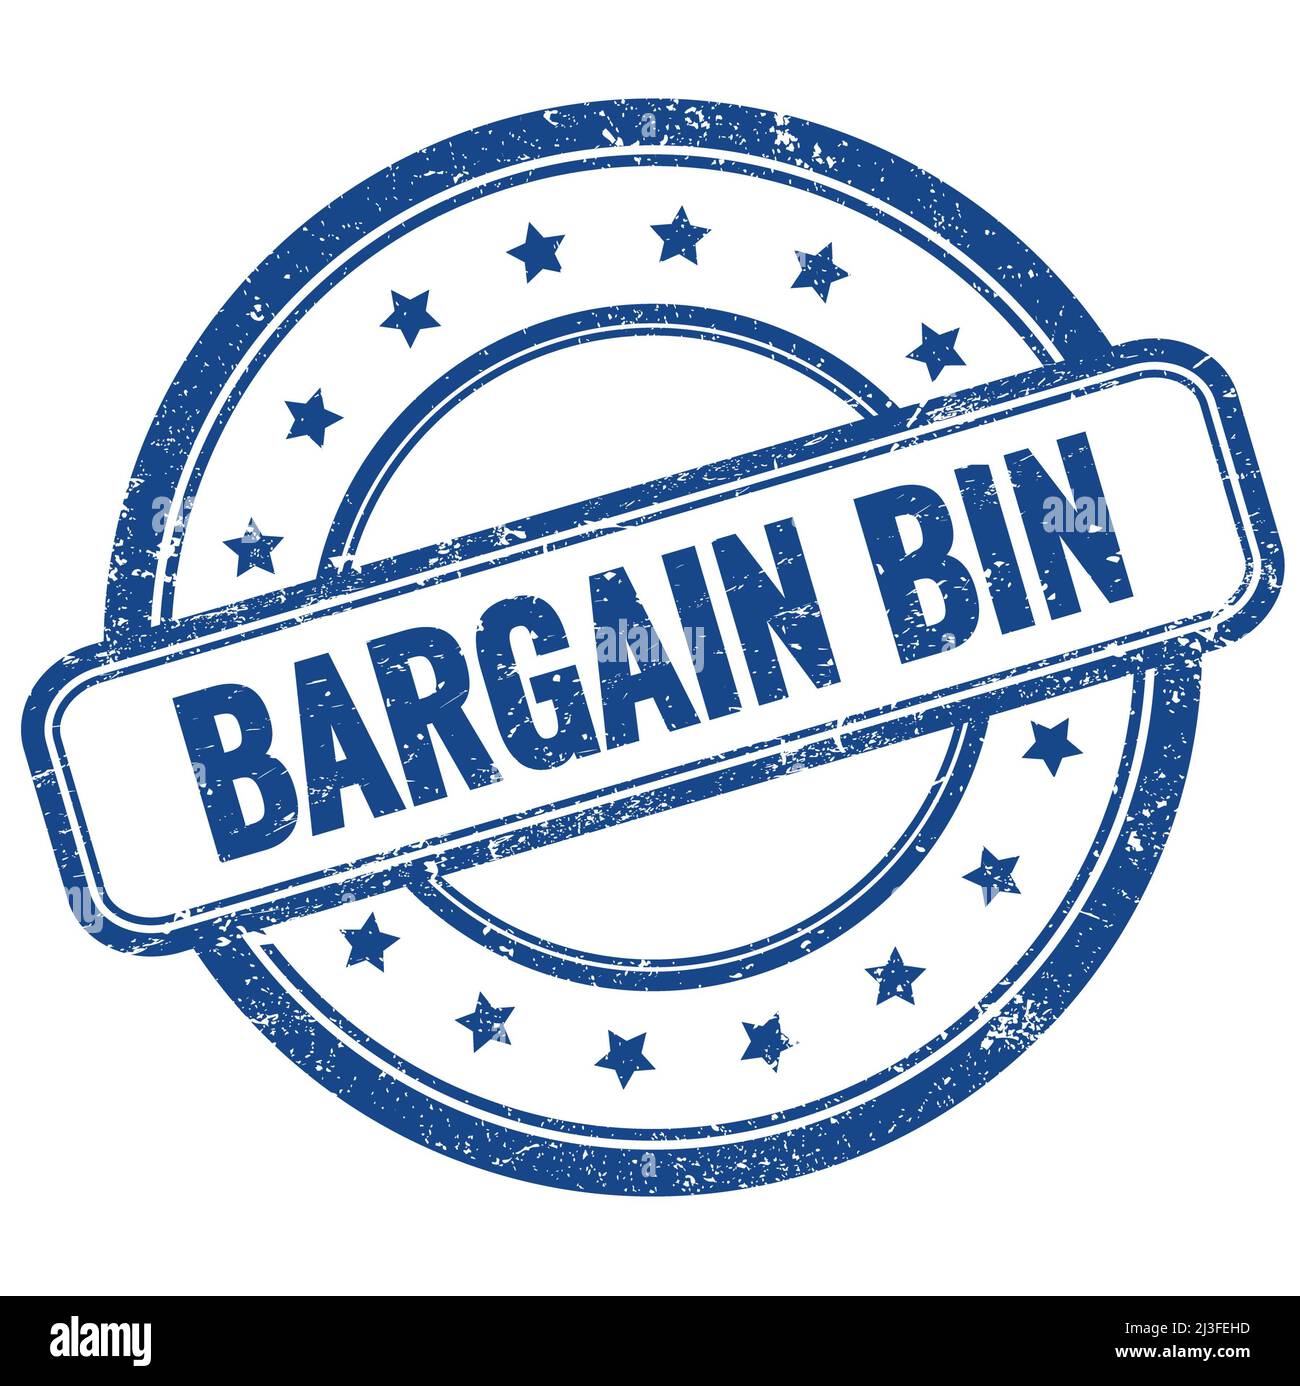 BARGAIN BIN text on blue vintage grungy round rubber stamp. Stock Photo